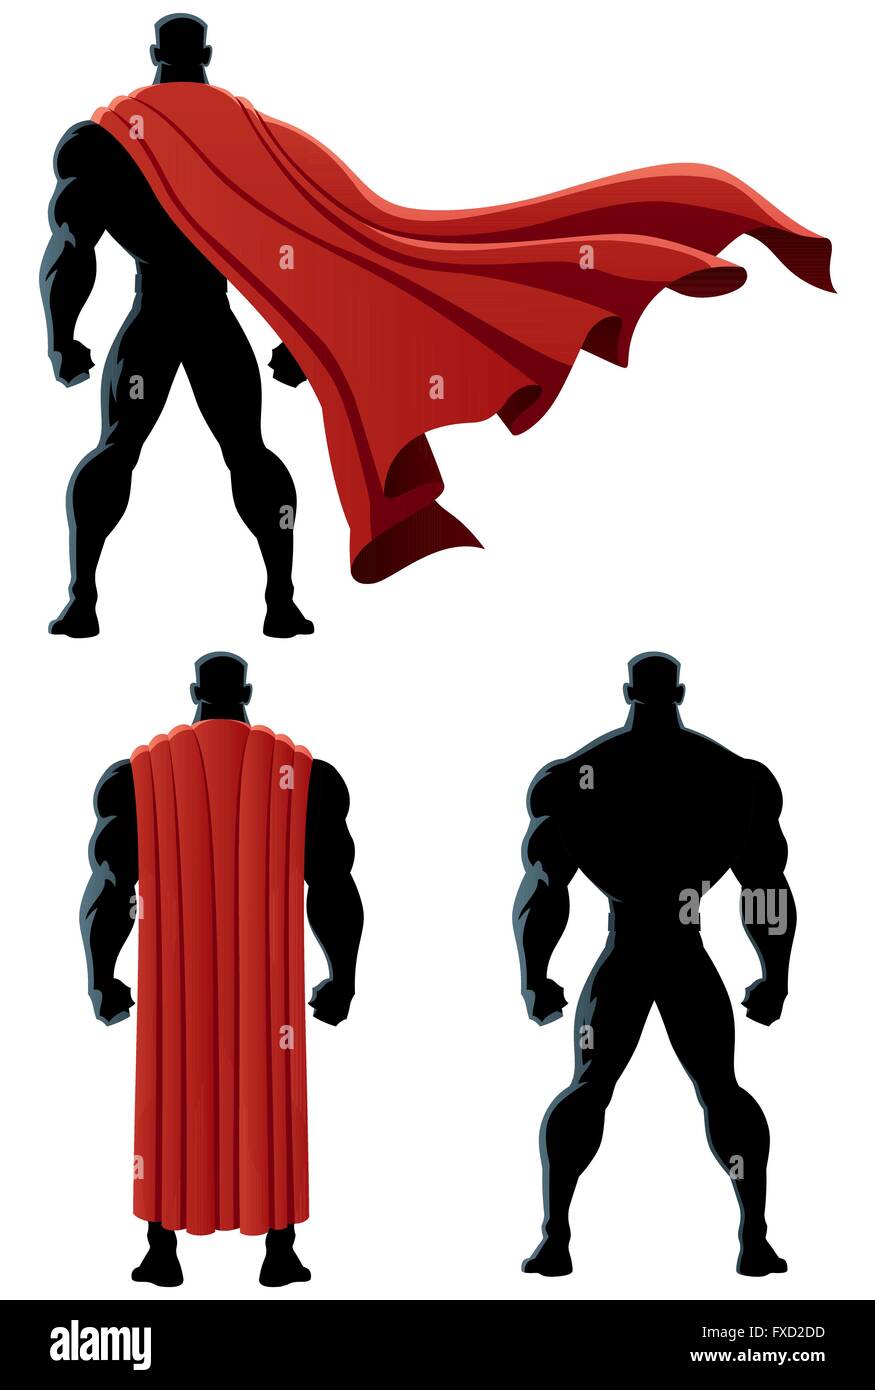 Back of superhero over white background and in 3 versions. No transparency used. Basic (linear) gradients. Stock Vector